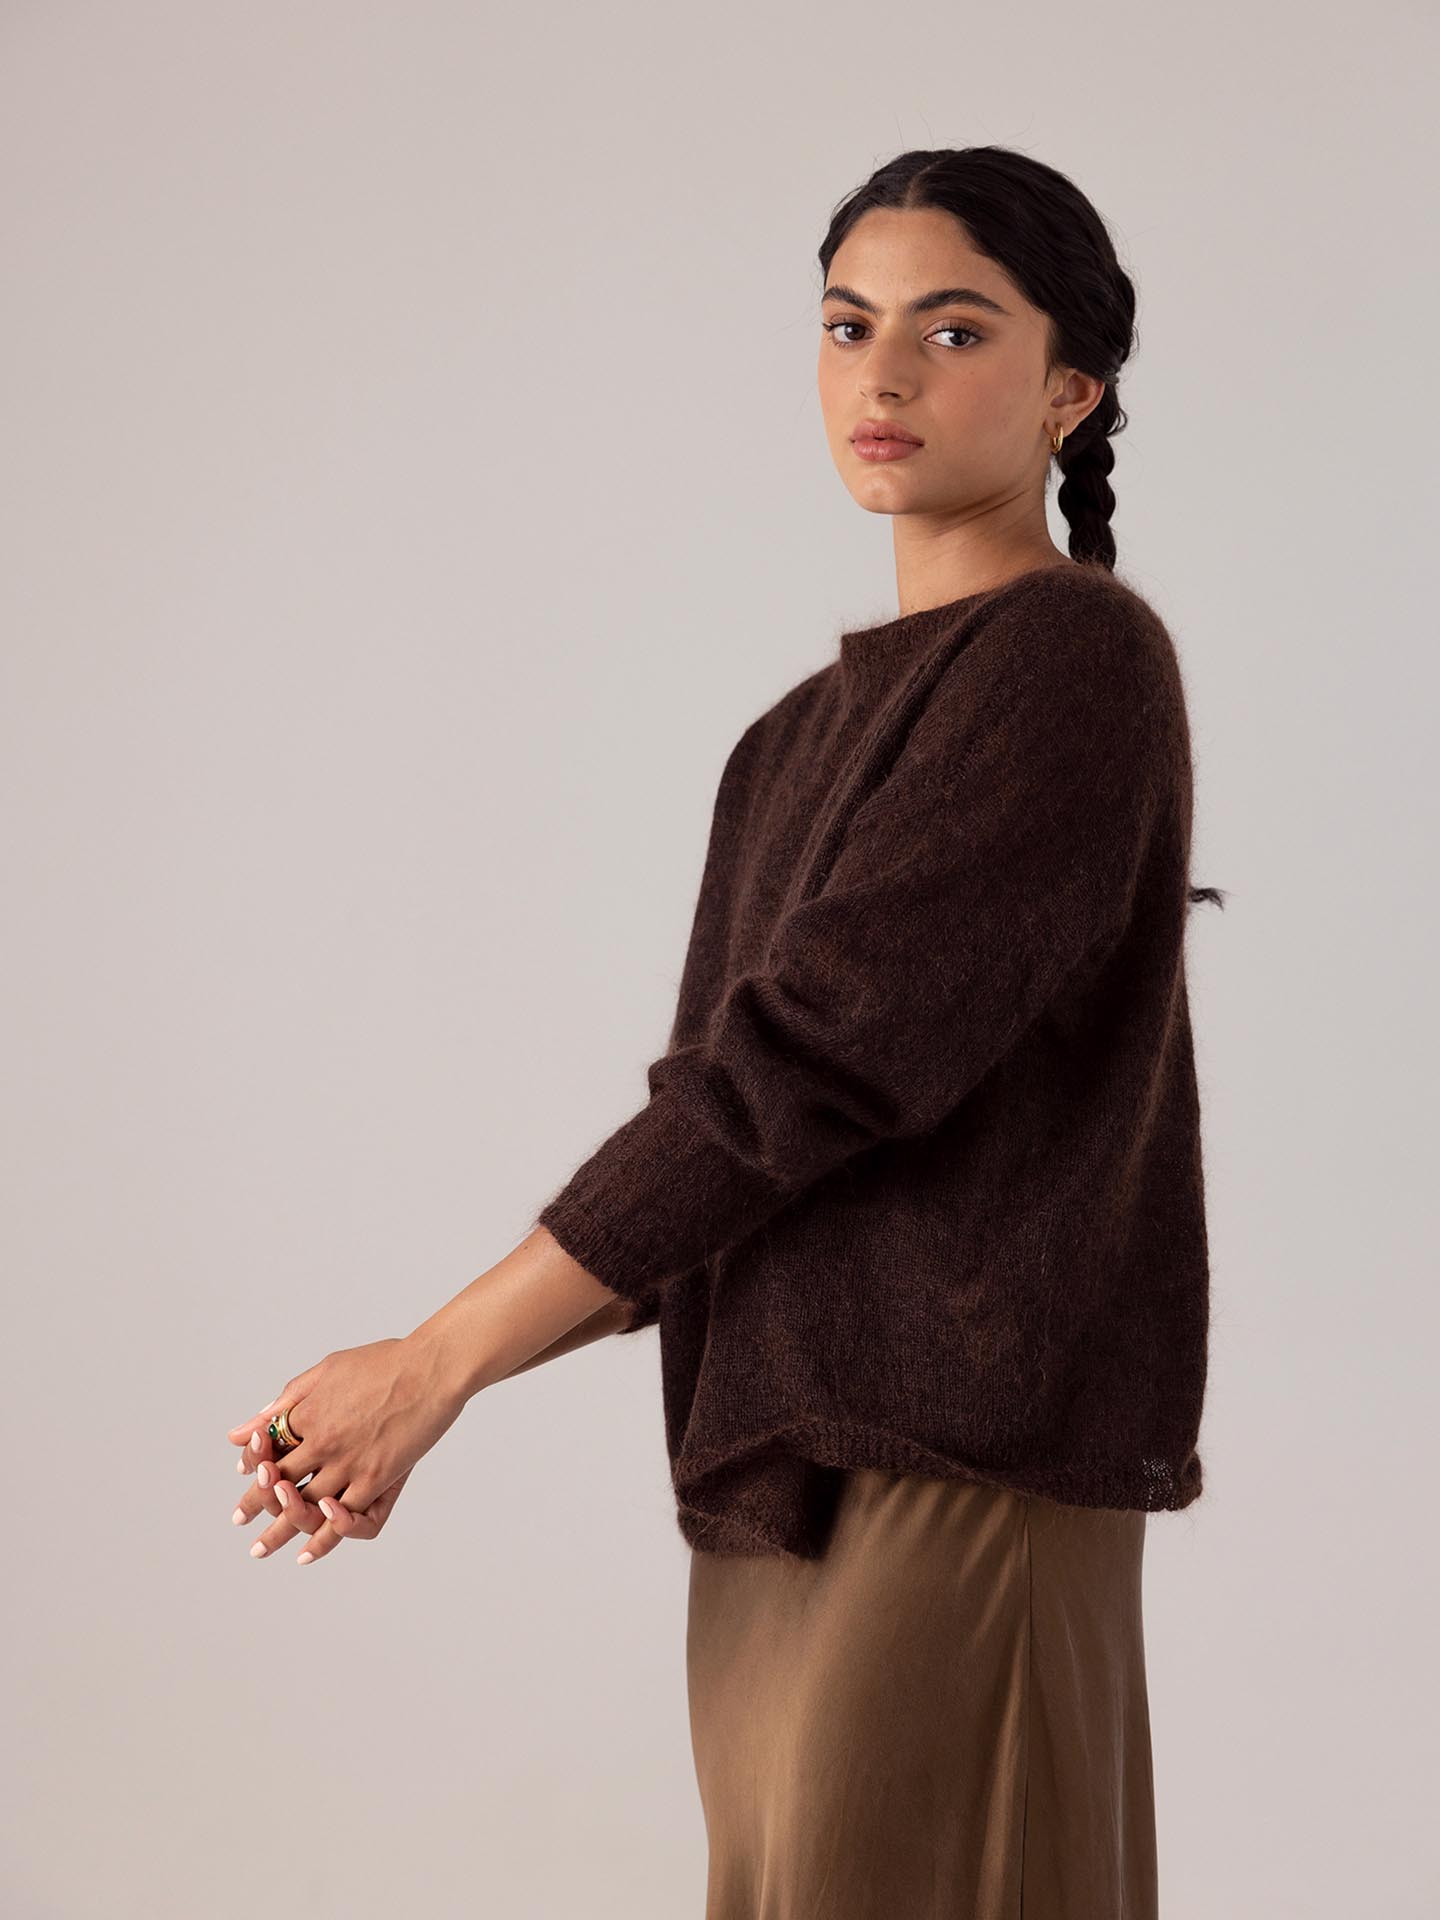 The model is wearing a Francie Feather Knit - Cocoa sweater and a tan skirt.